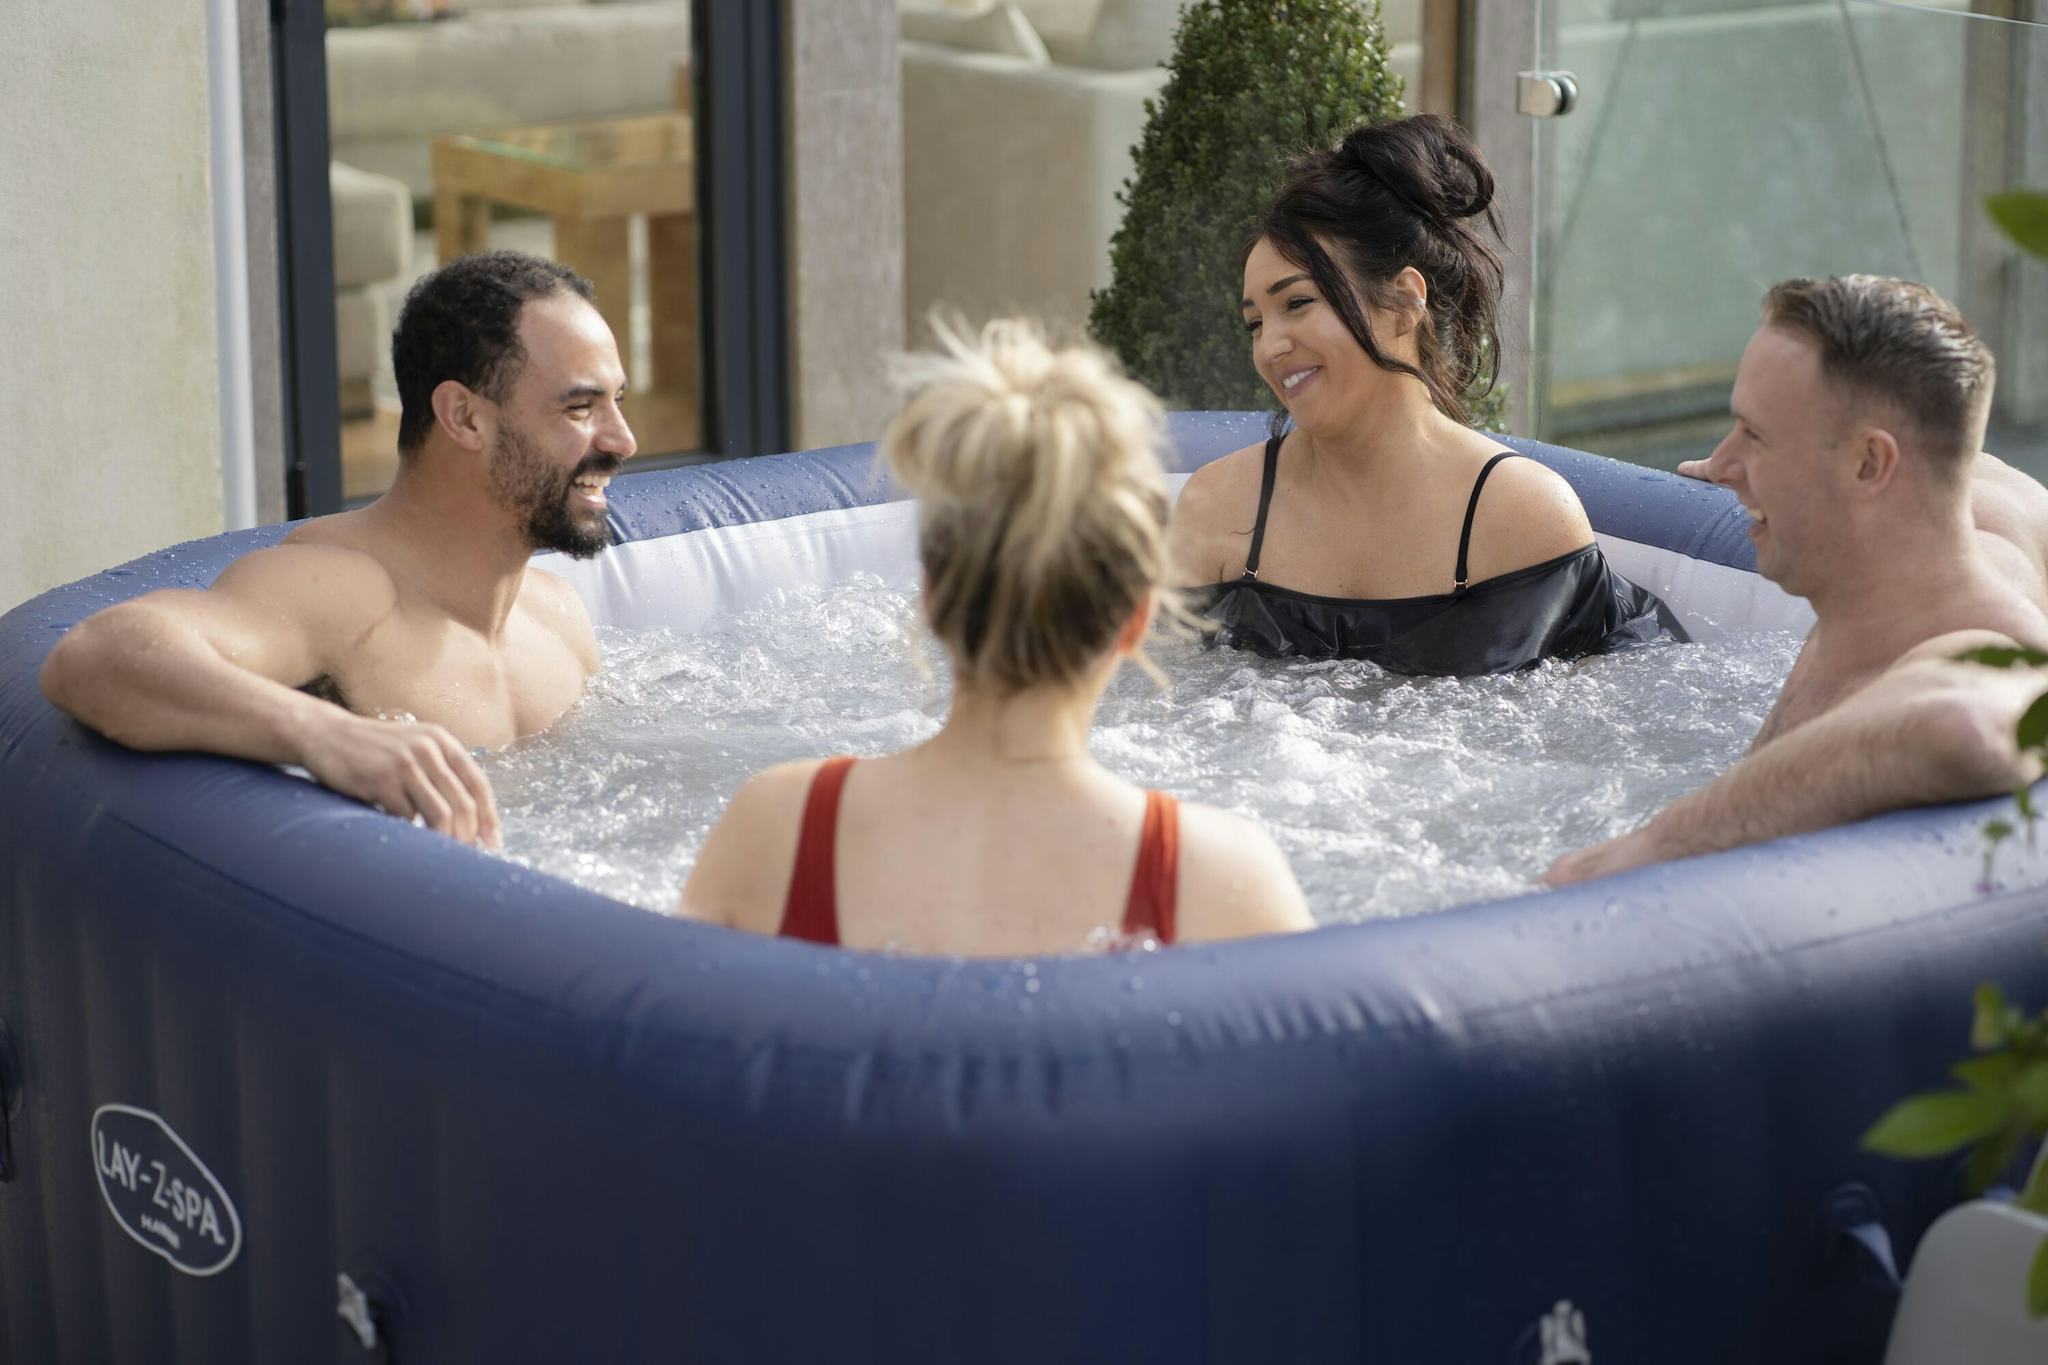 Spas Gonflables Spa gonflable carré Lay-Z-Spa Hawaii Airjet™ 4 - 6 personnes Bestway 6